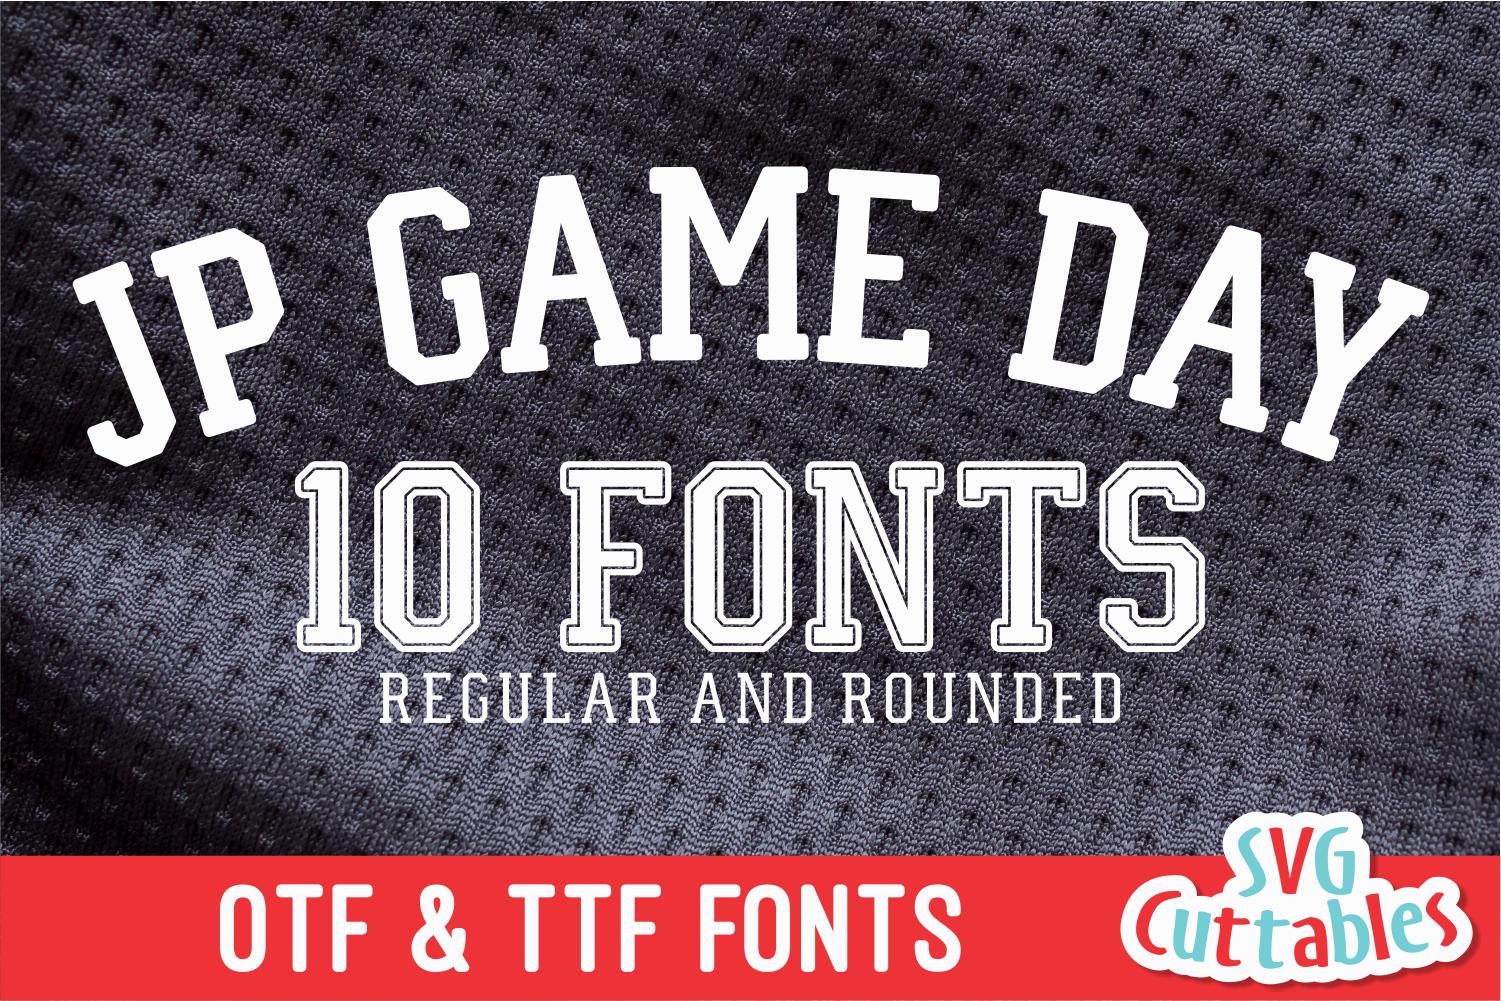 JP Game Day Font